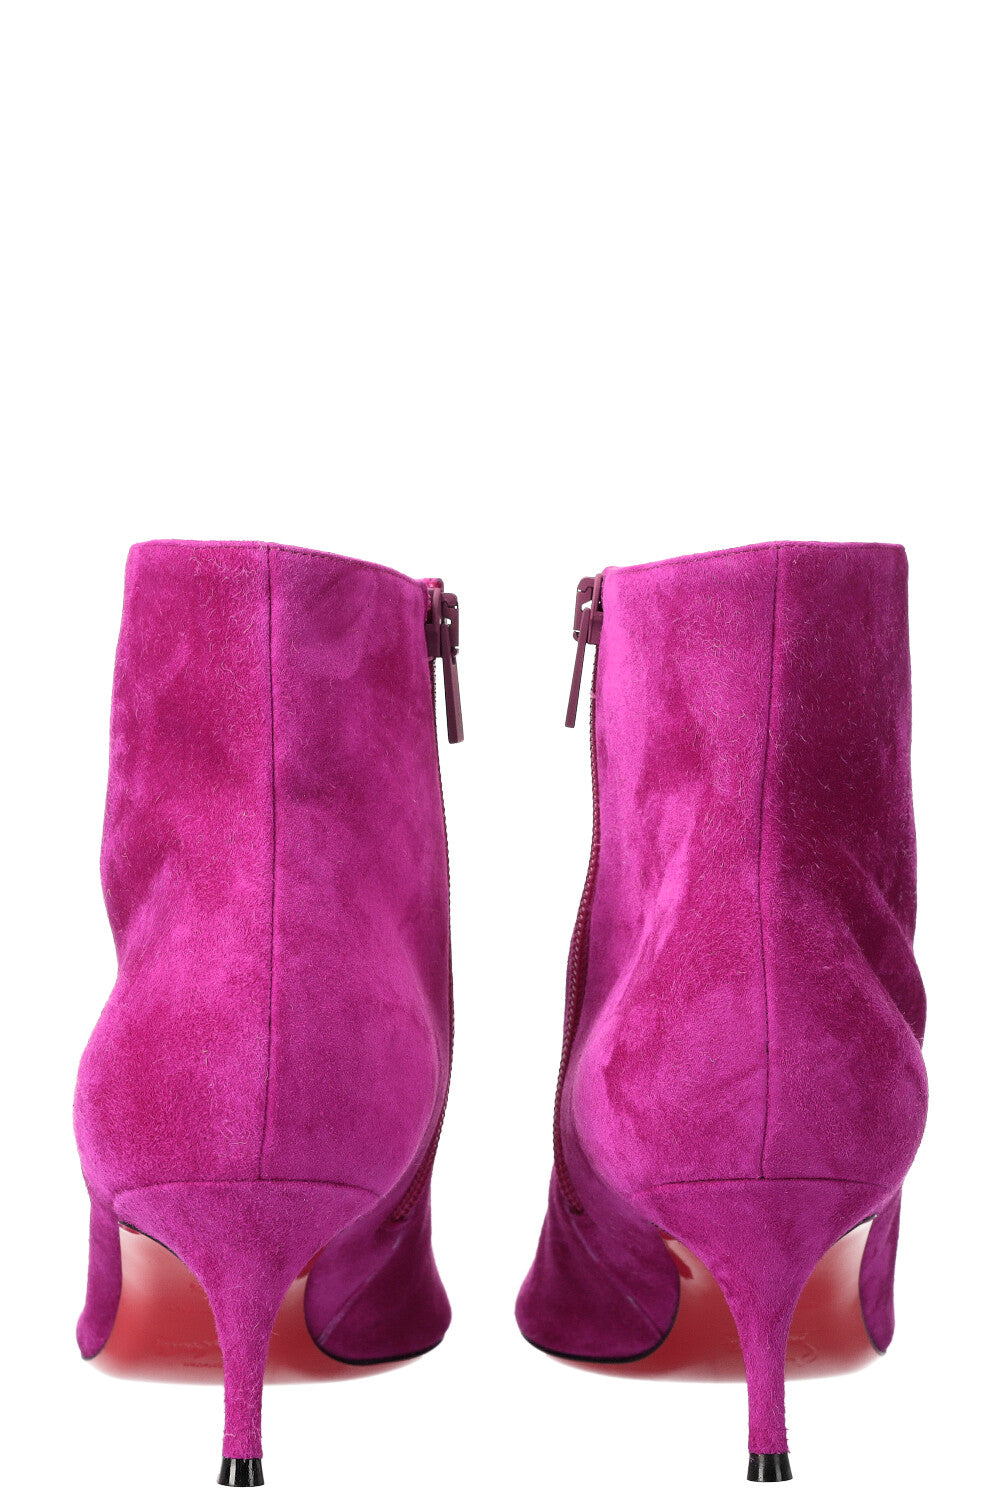 CHRISTIAN LOUBOUTIN So Kate Boots Suede Pink